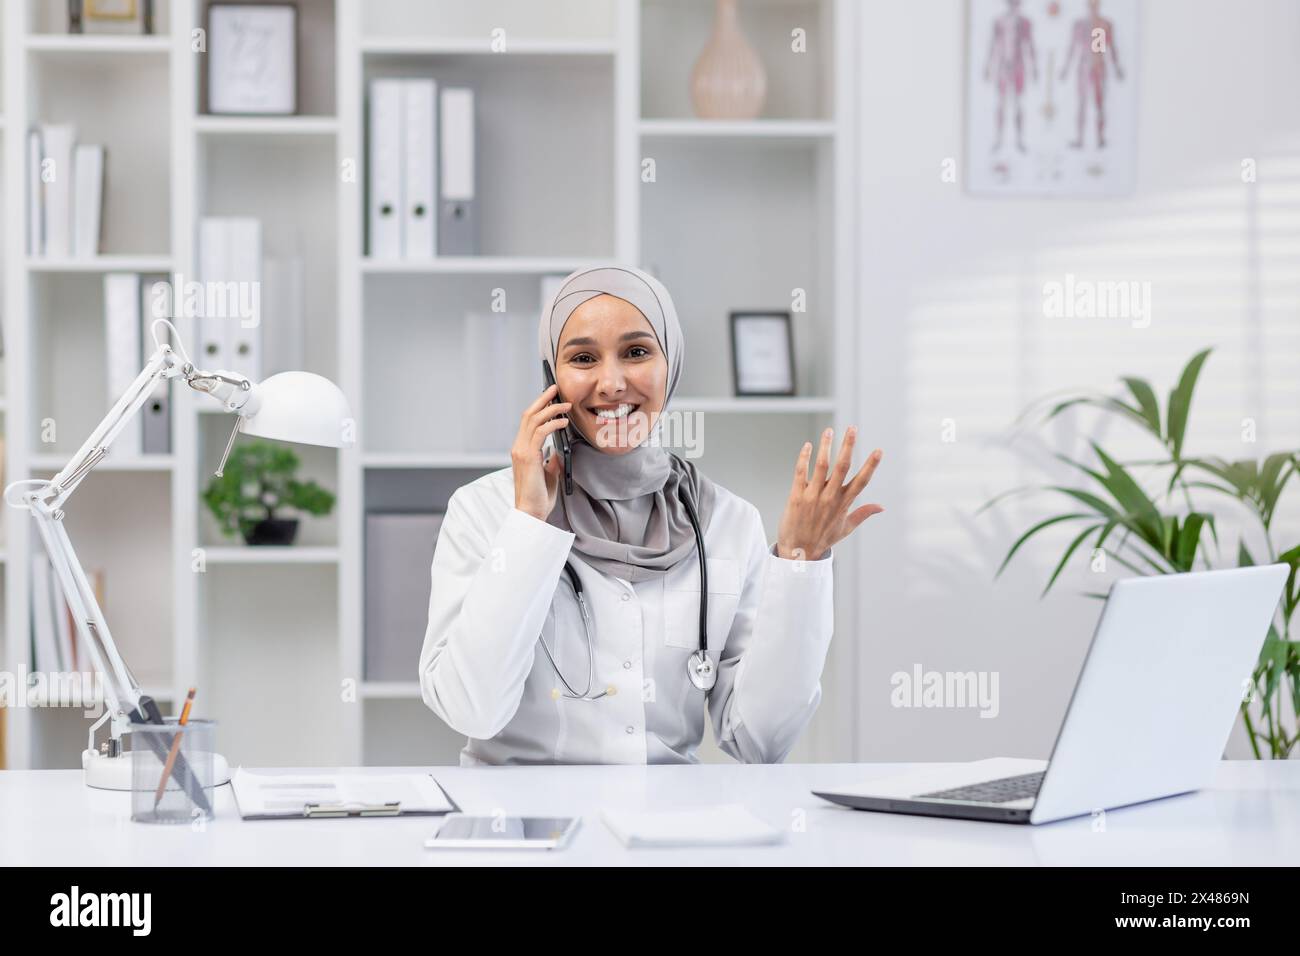 Smiling Muslim female doctor in a hijab having a conversation on the phone while sitting at her desk in a well-lit clinic office, looking satisfied. Stock Photo